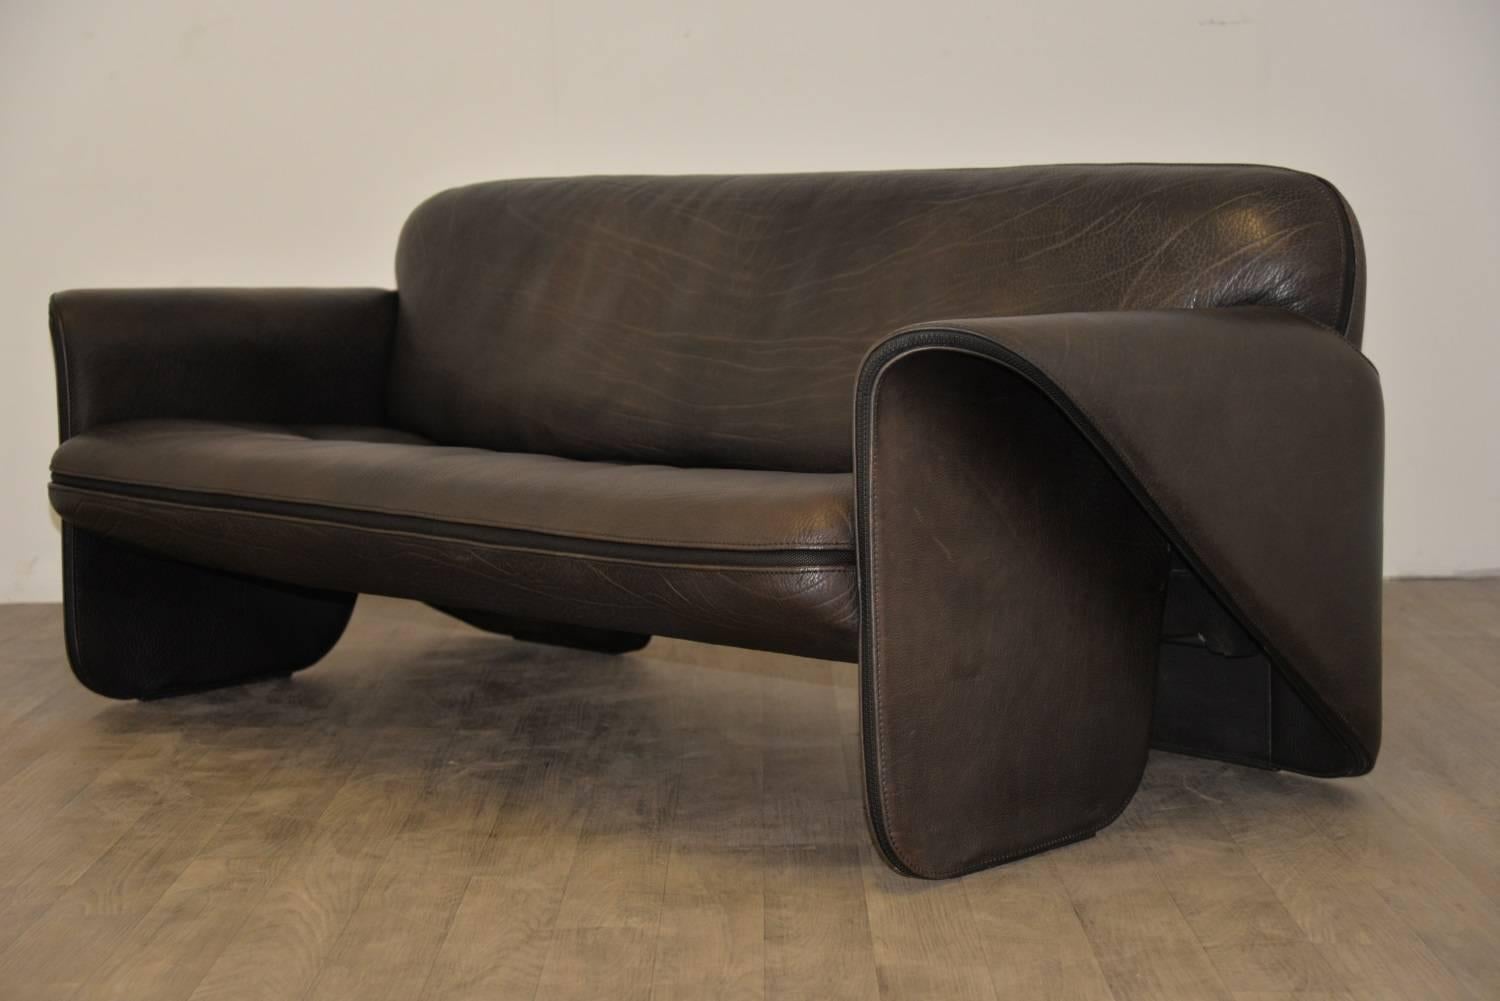 Discounted airfreight for our International Customers ( from 2 weeks door to door) 

Ultra rare vintage De Sede DS 125 sofa and armchair designed by Gerd Lange in 1978. These sculptural pieces are upholstered in 3mm-5mm thick dark brown leather with